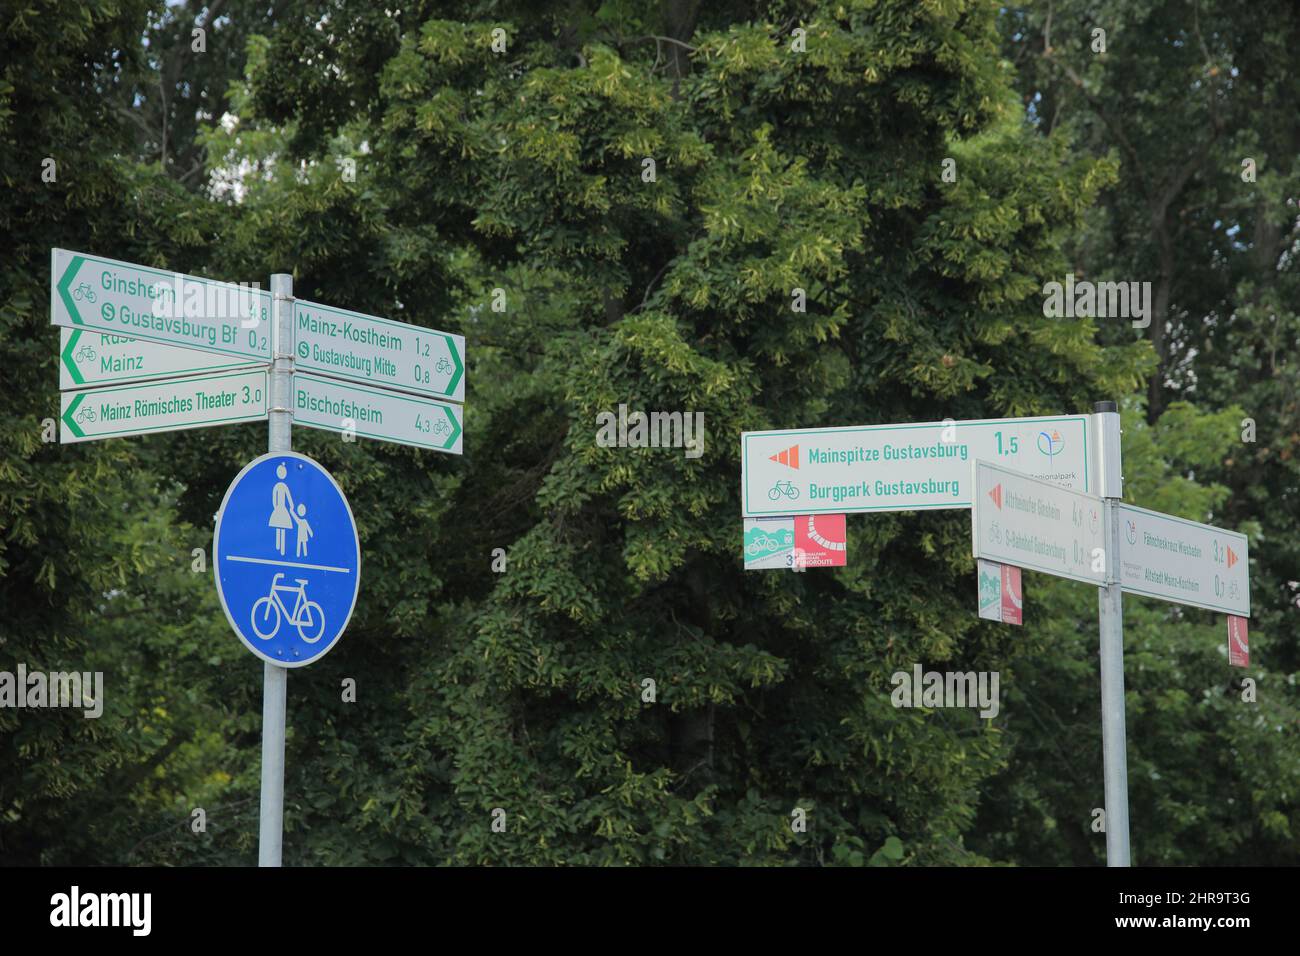 Signposts to cycle paths, information signs, Gustavsburg, Germany Stock Photo